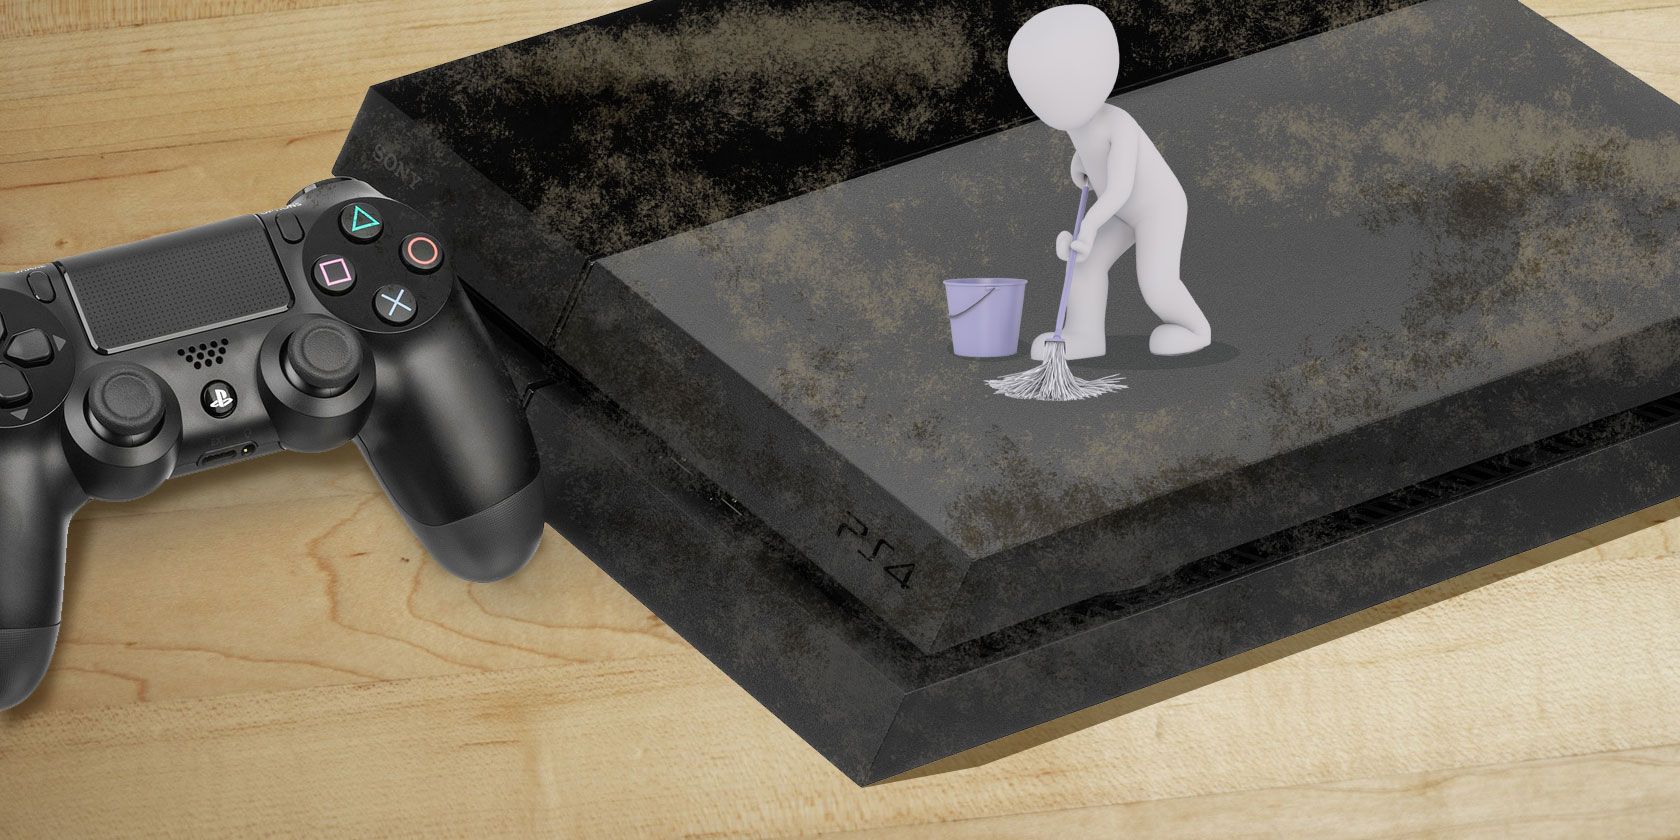 æg spredning Rettidig How to Clean Dust From a Noisy PS4 in 8 Simple Steps